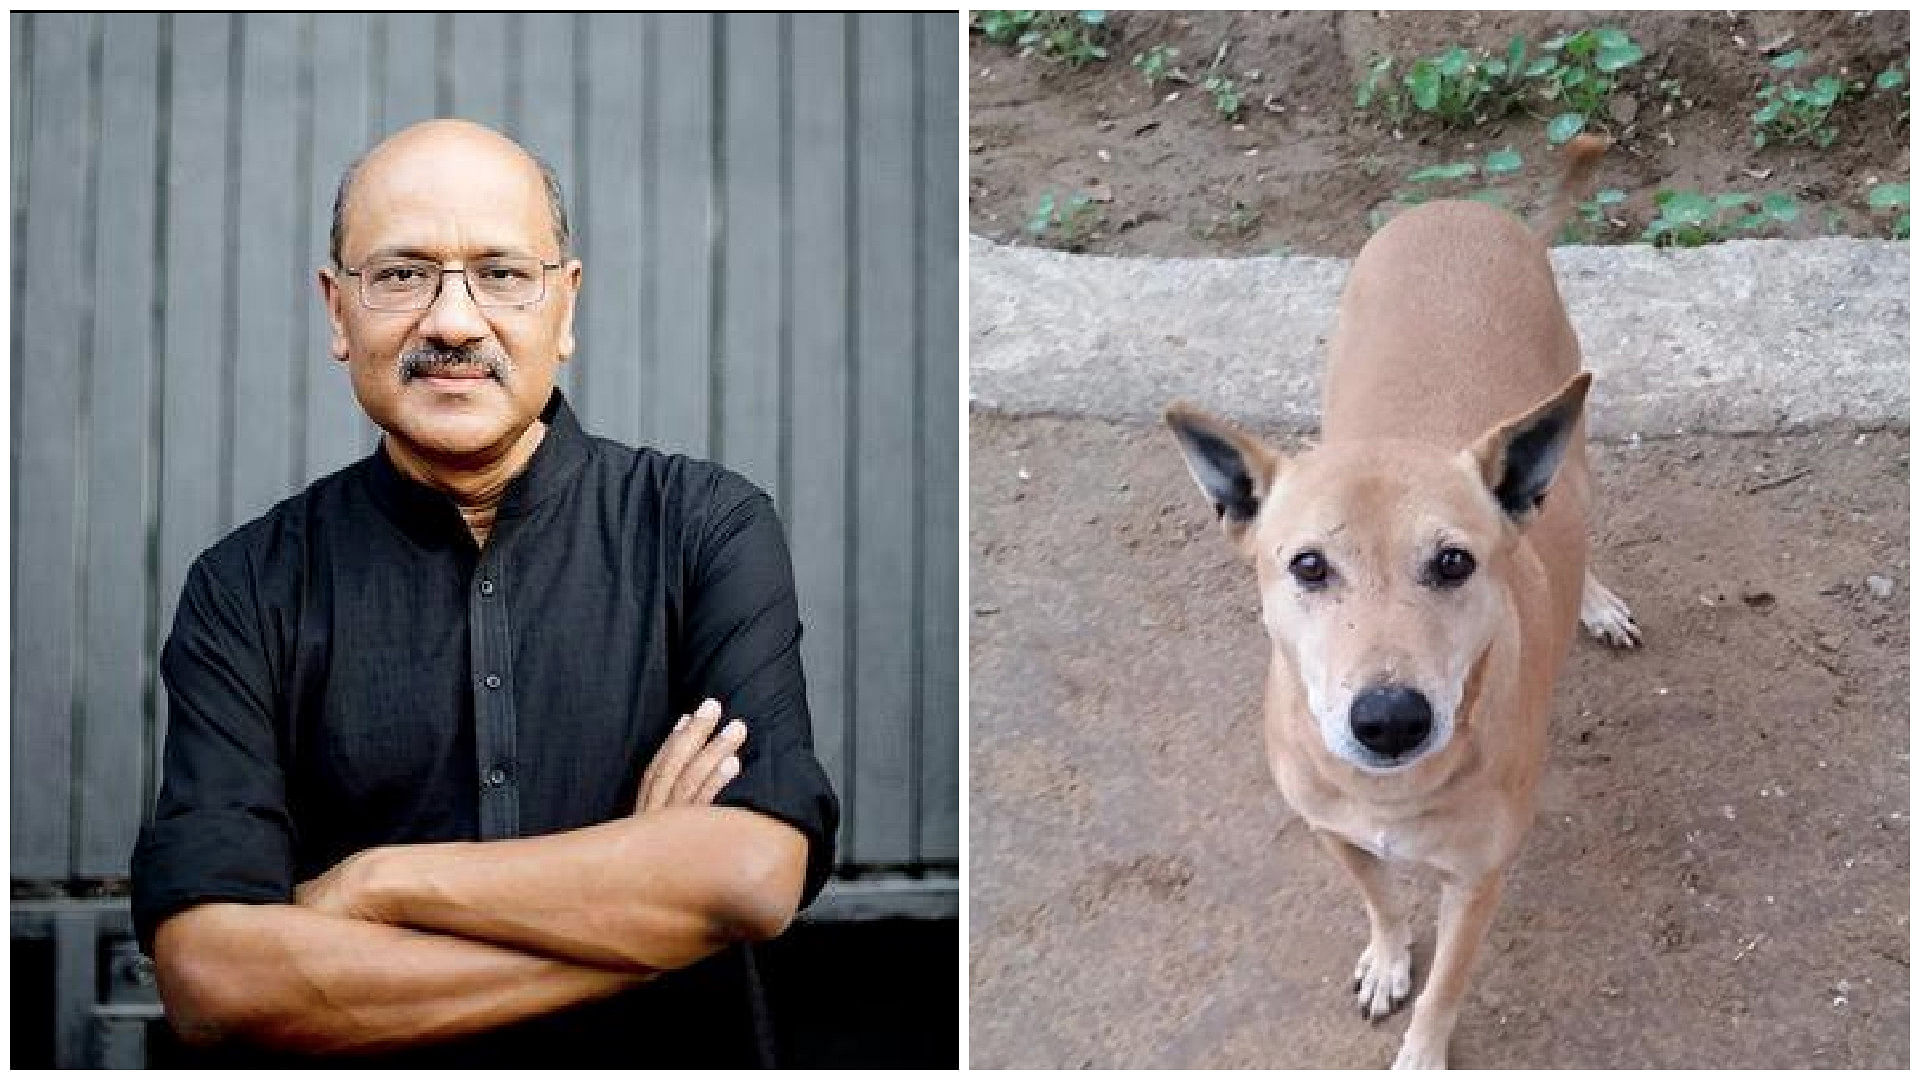 Shekhar Gupta made a strong pitch on Facebook and on Twitter against the Kerala government’s proposal to cull stray dogs in the state. (Photo Courtesy: Facebook/Shekhar Gupta)